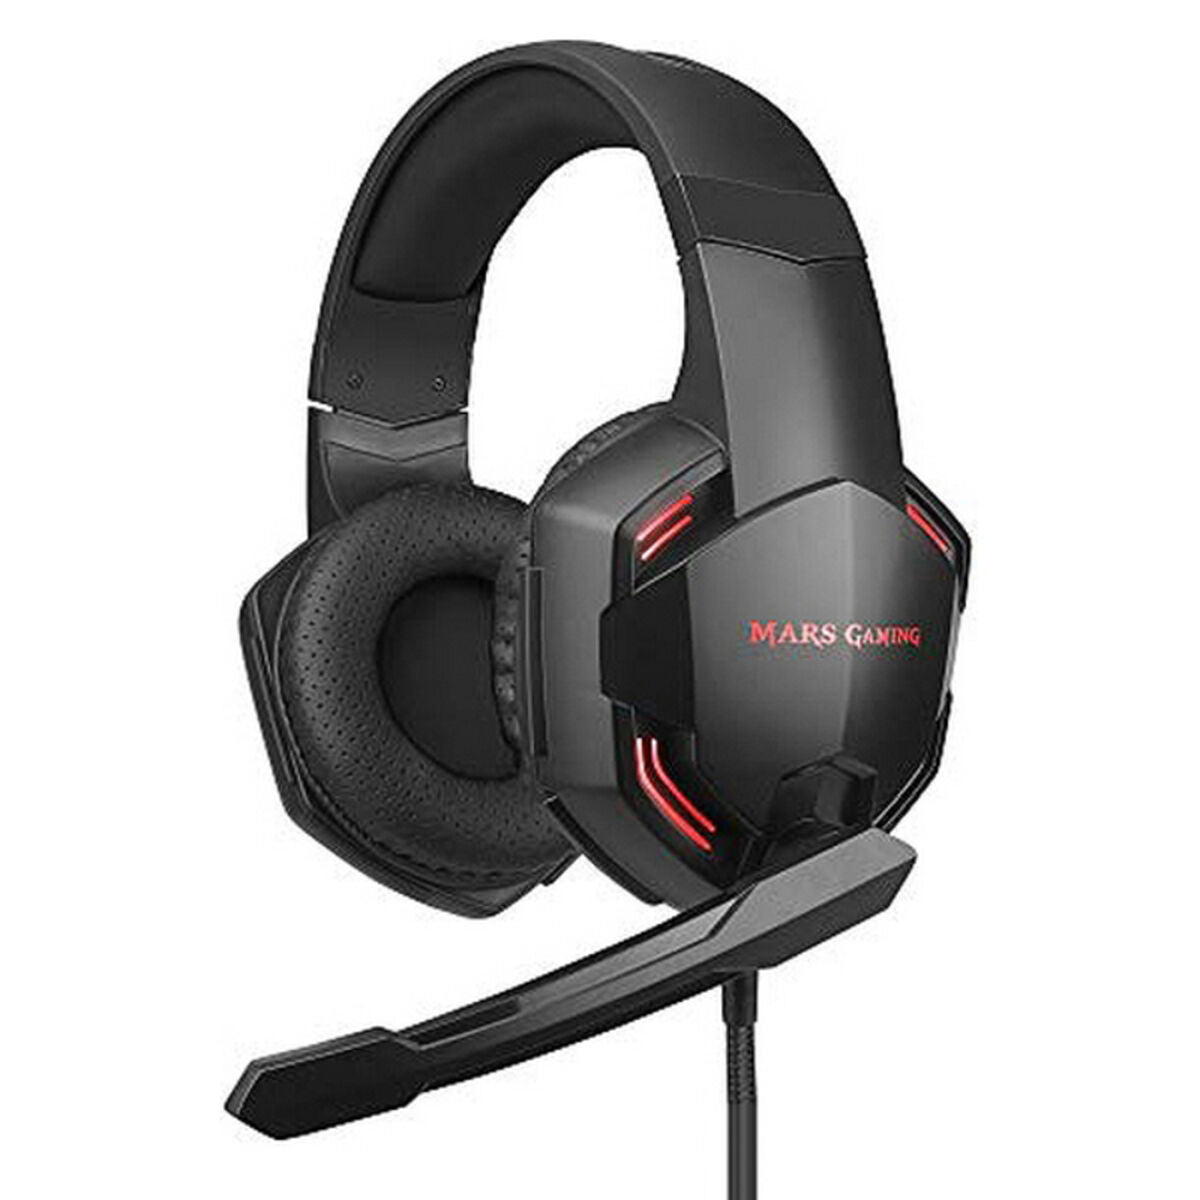 Gaming Headset with Microphone Mars Gaming MHXPRO71 Black Red-1